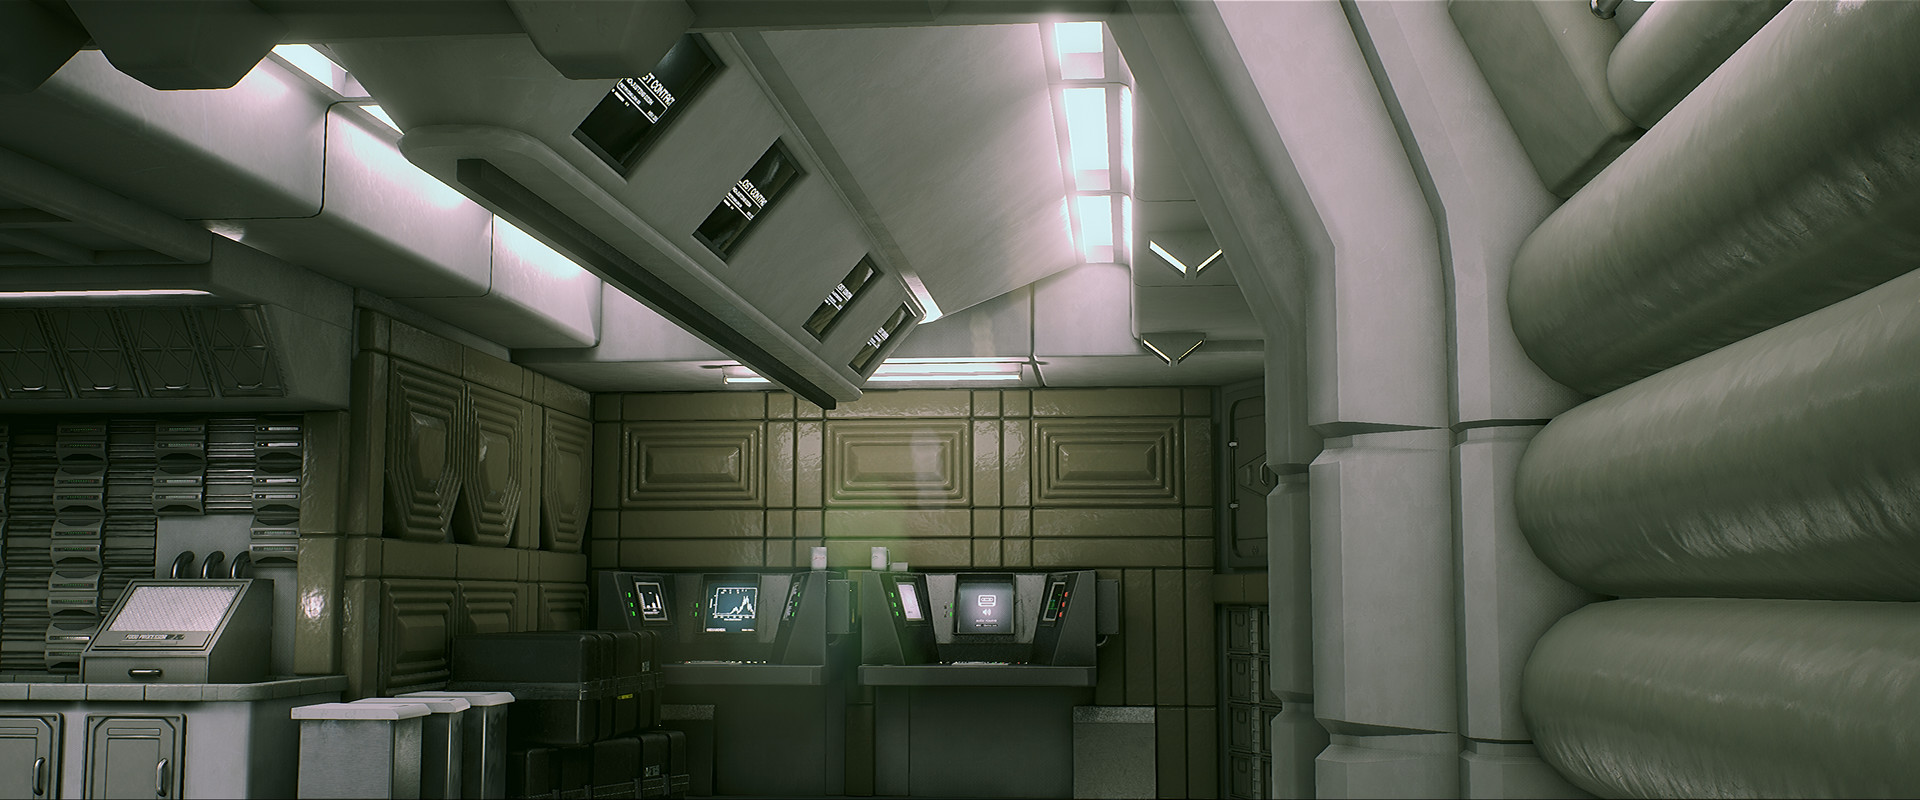 Alien: Isolation Fanart Really Nails The ‘Deserted Space Station’ Feel